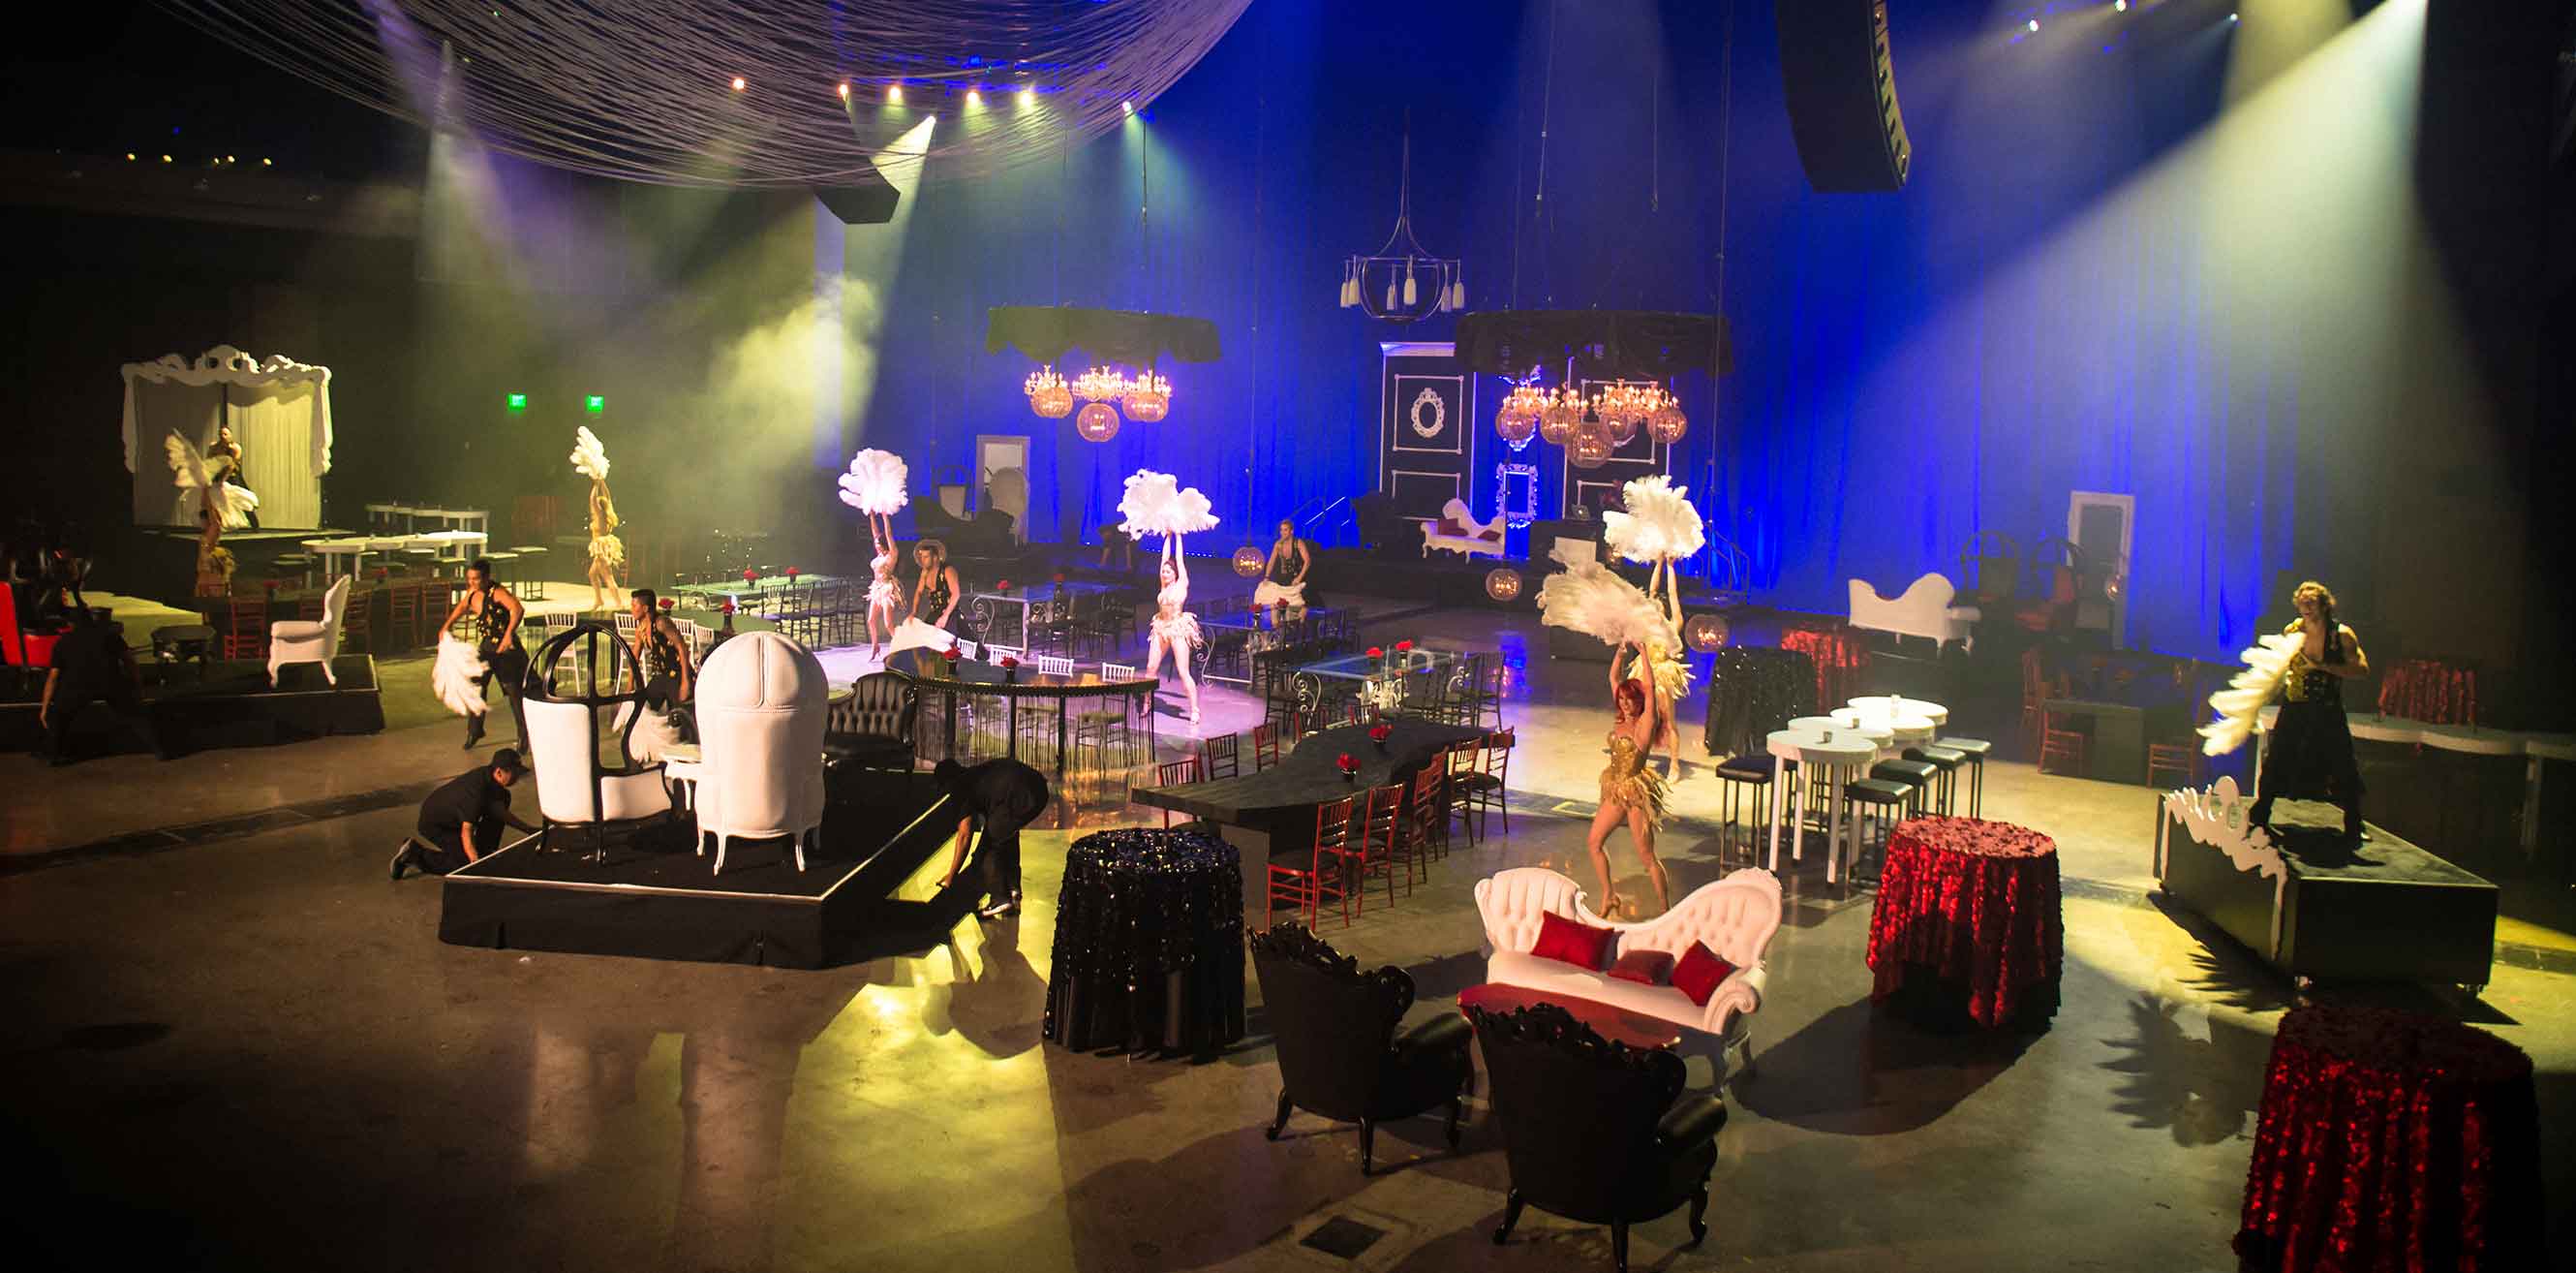 Creative Corporate Events from Destinations by Design